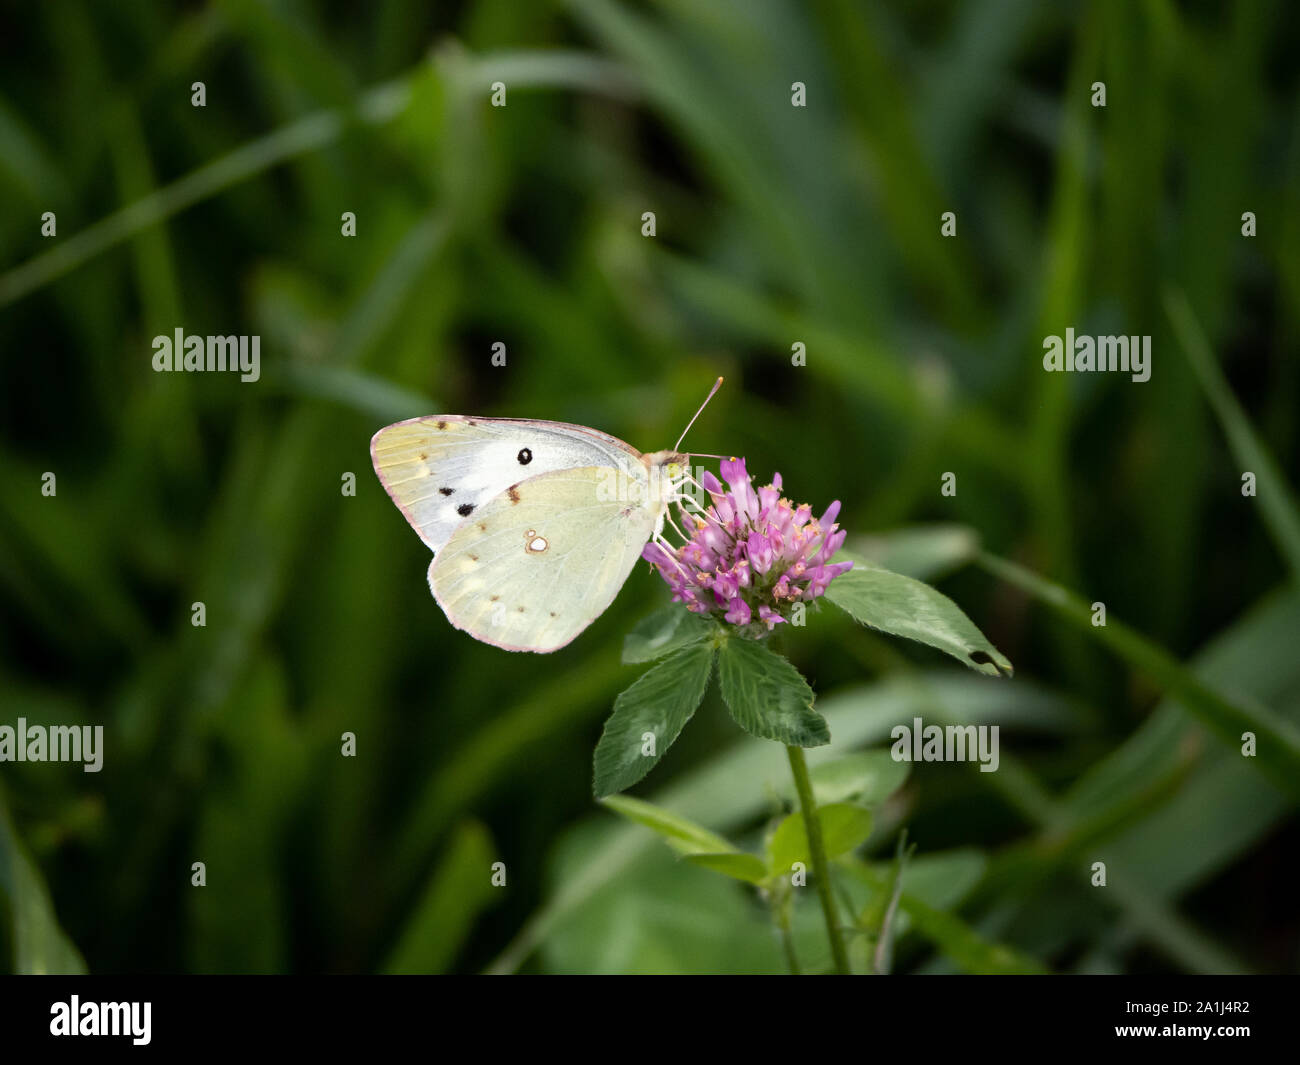 A variety of clouded pale yellow butterfly, possibly Colias erate, feeds from clover buds along a small mountain stream in Japan. Stock Photo